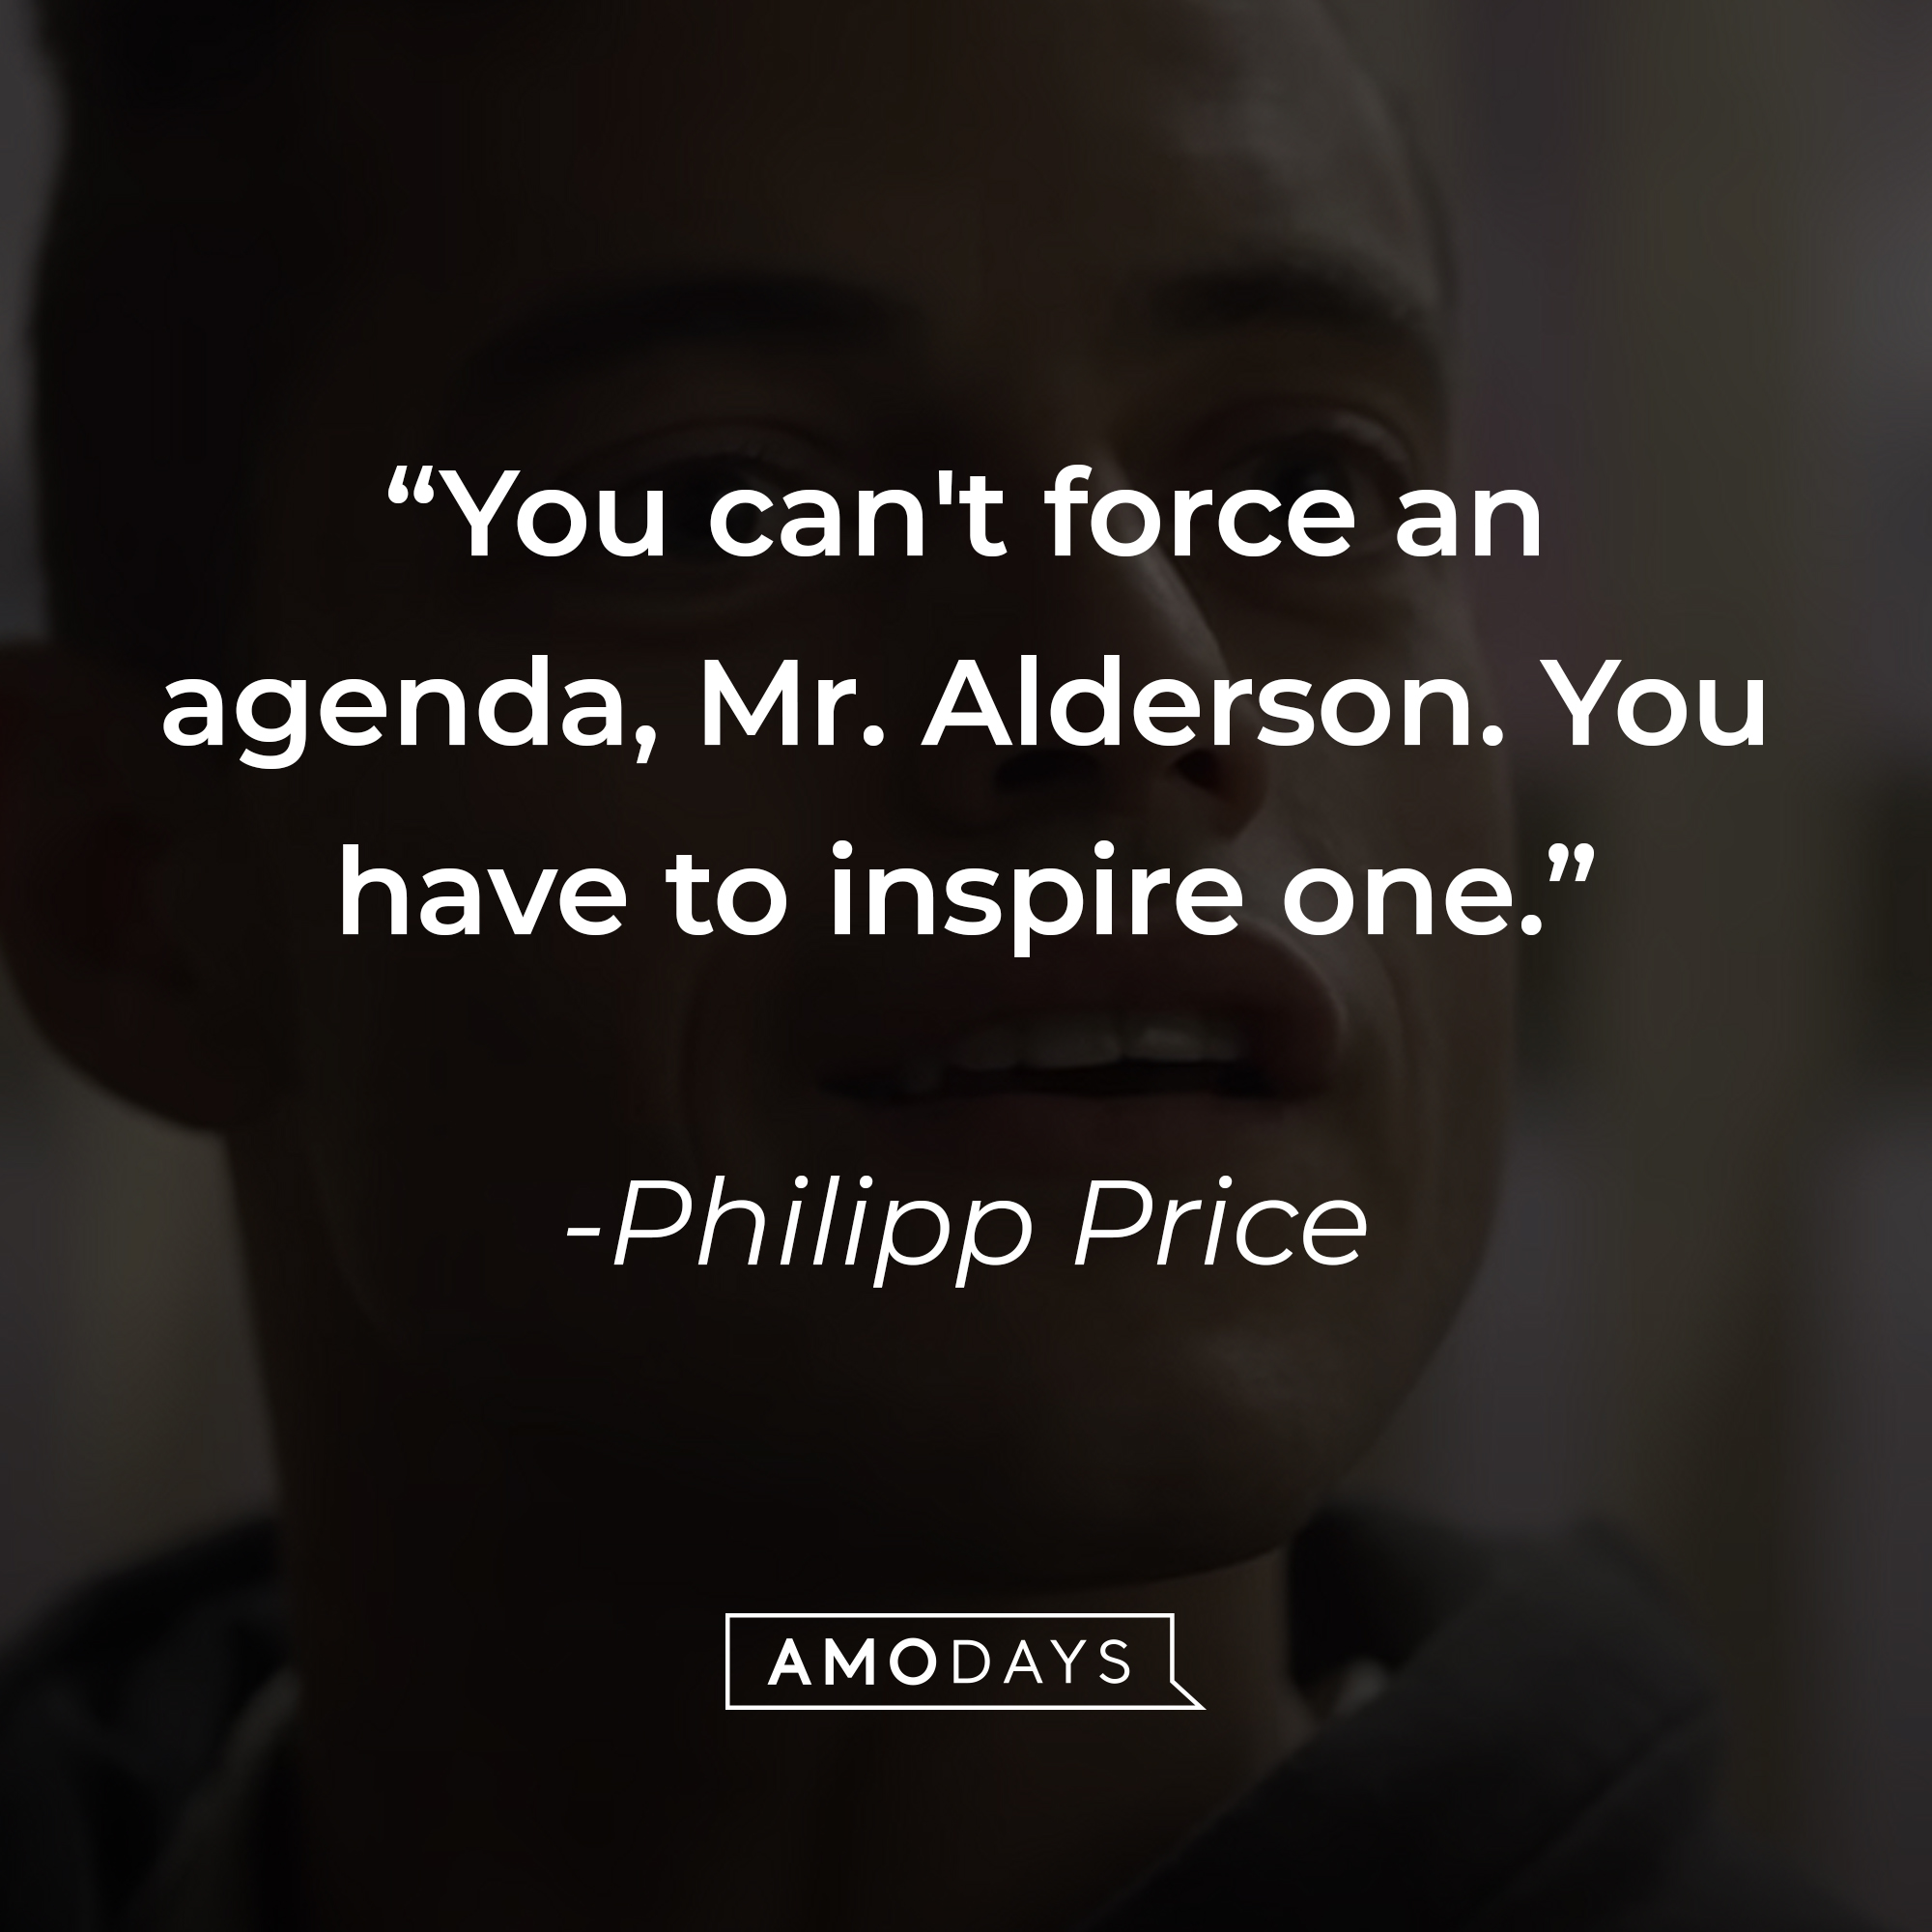 Philipp Price's quote: "You can't force an agenda, Mr. Alderson. You have to inspire one." | Source: youtube.com/MrRobot